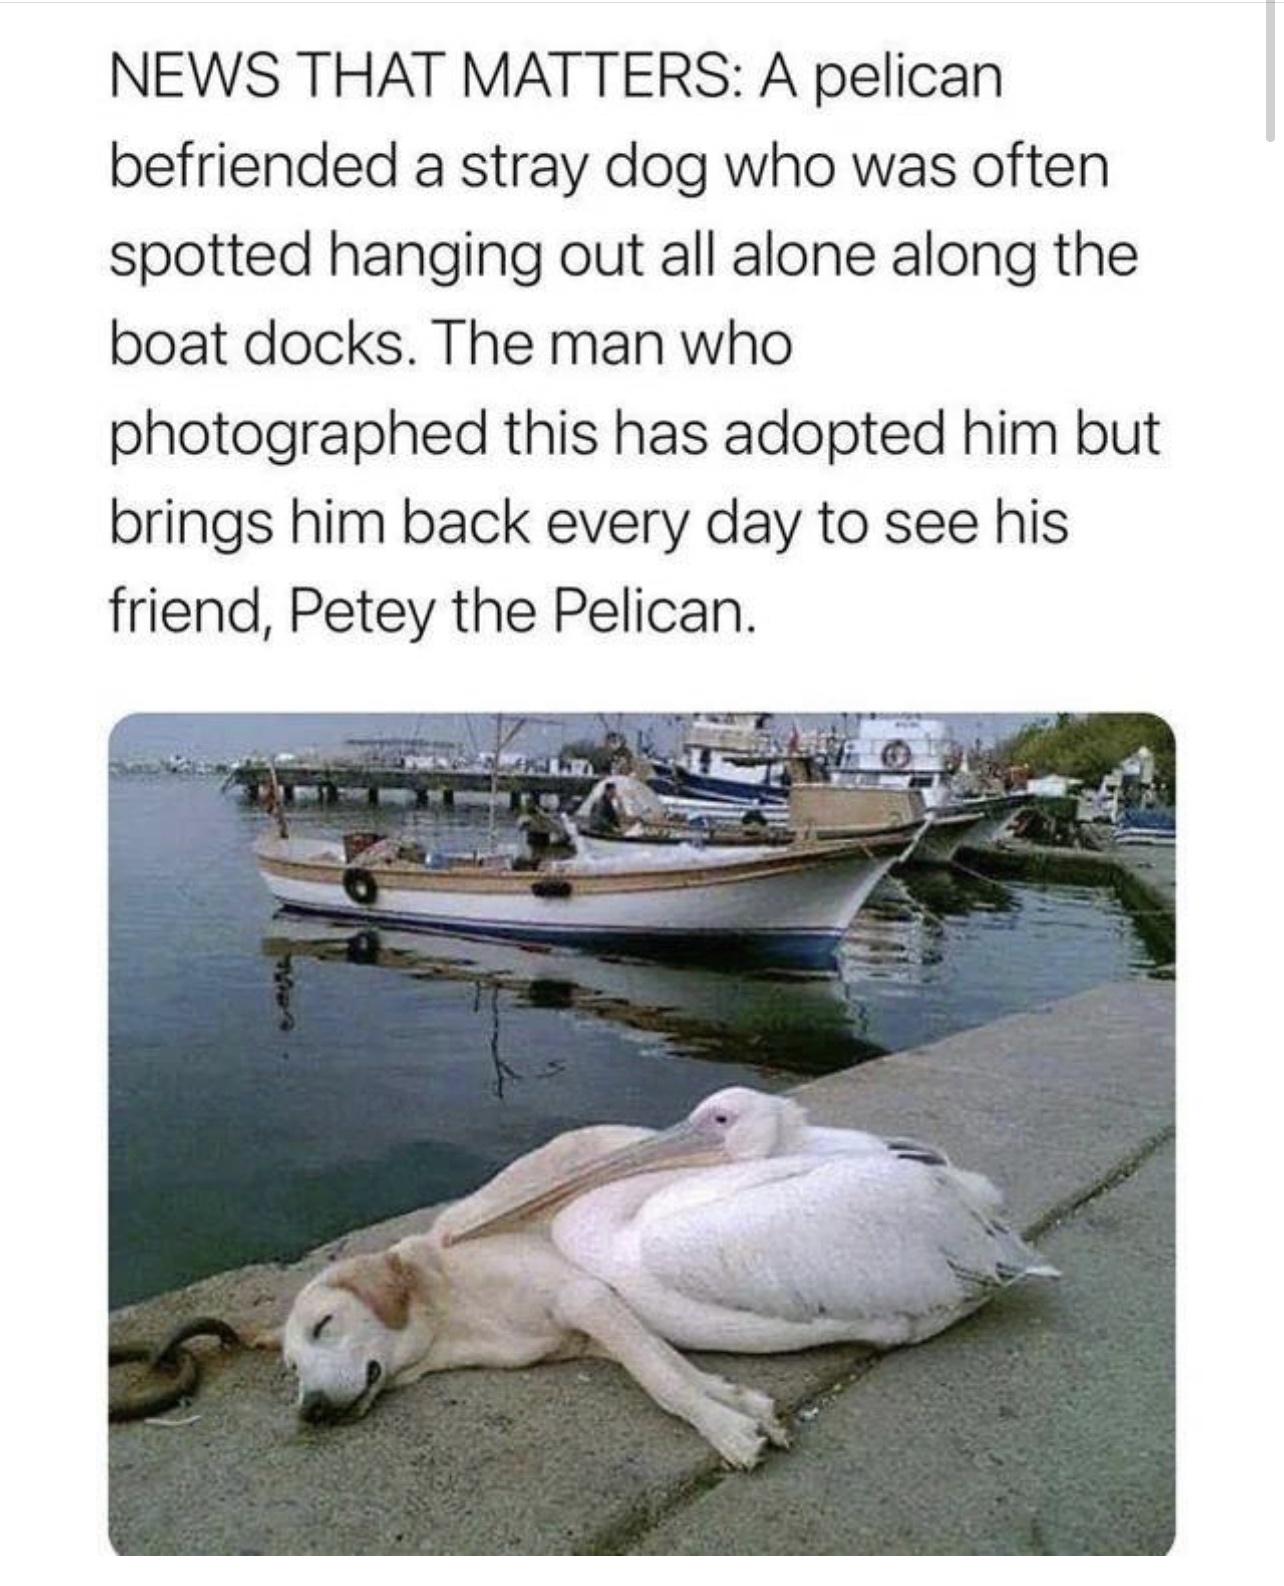 stories don't get much more heartwarming than this